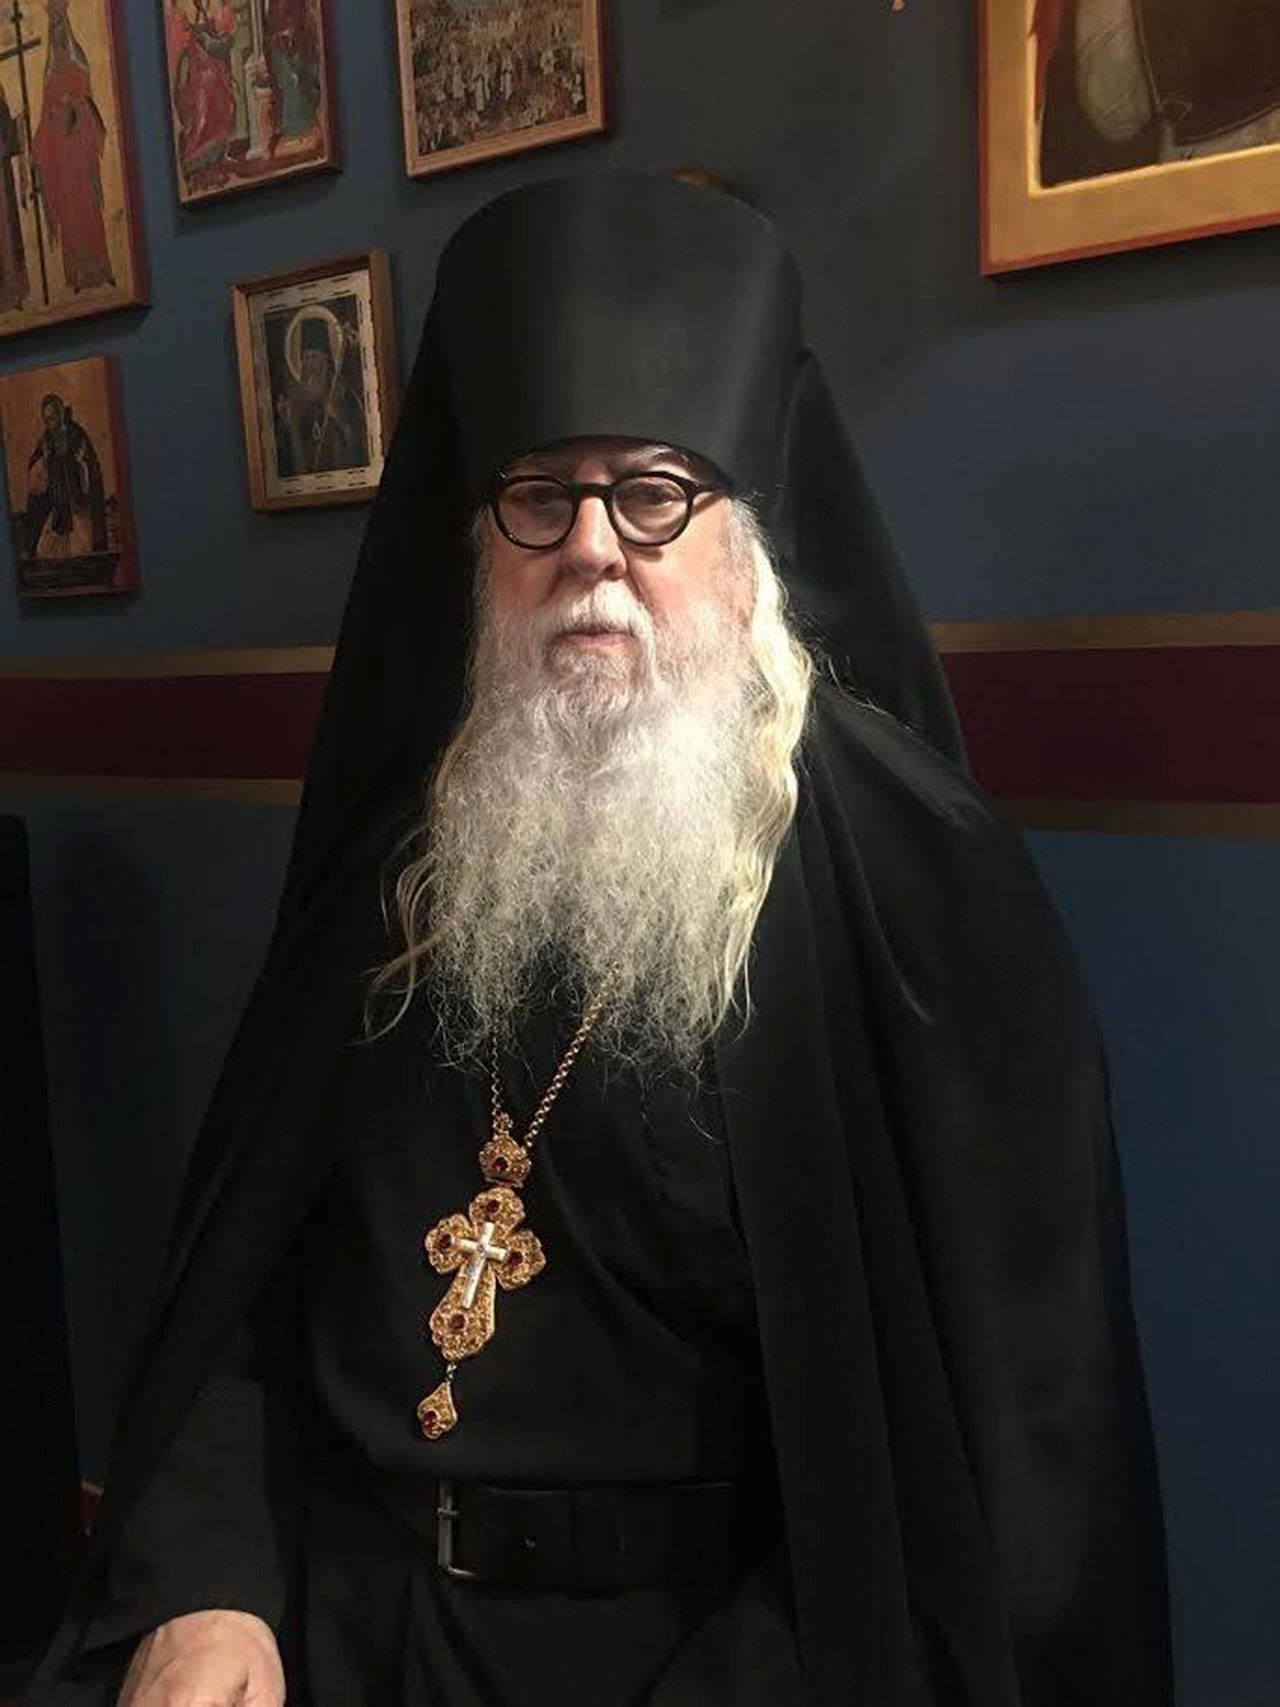 Father Tryphon, a Russian Orthodox monk, says he hopes to meet with his assailant in jail. (Courtesy Photo)